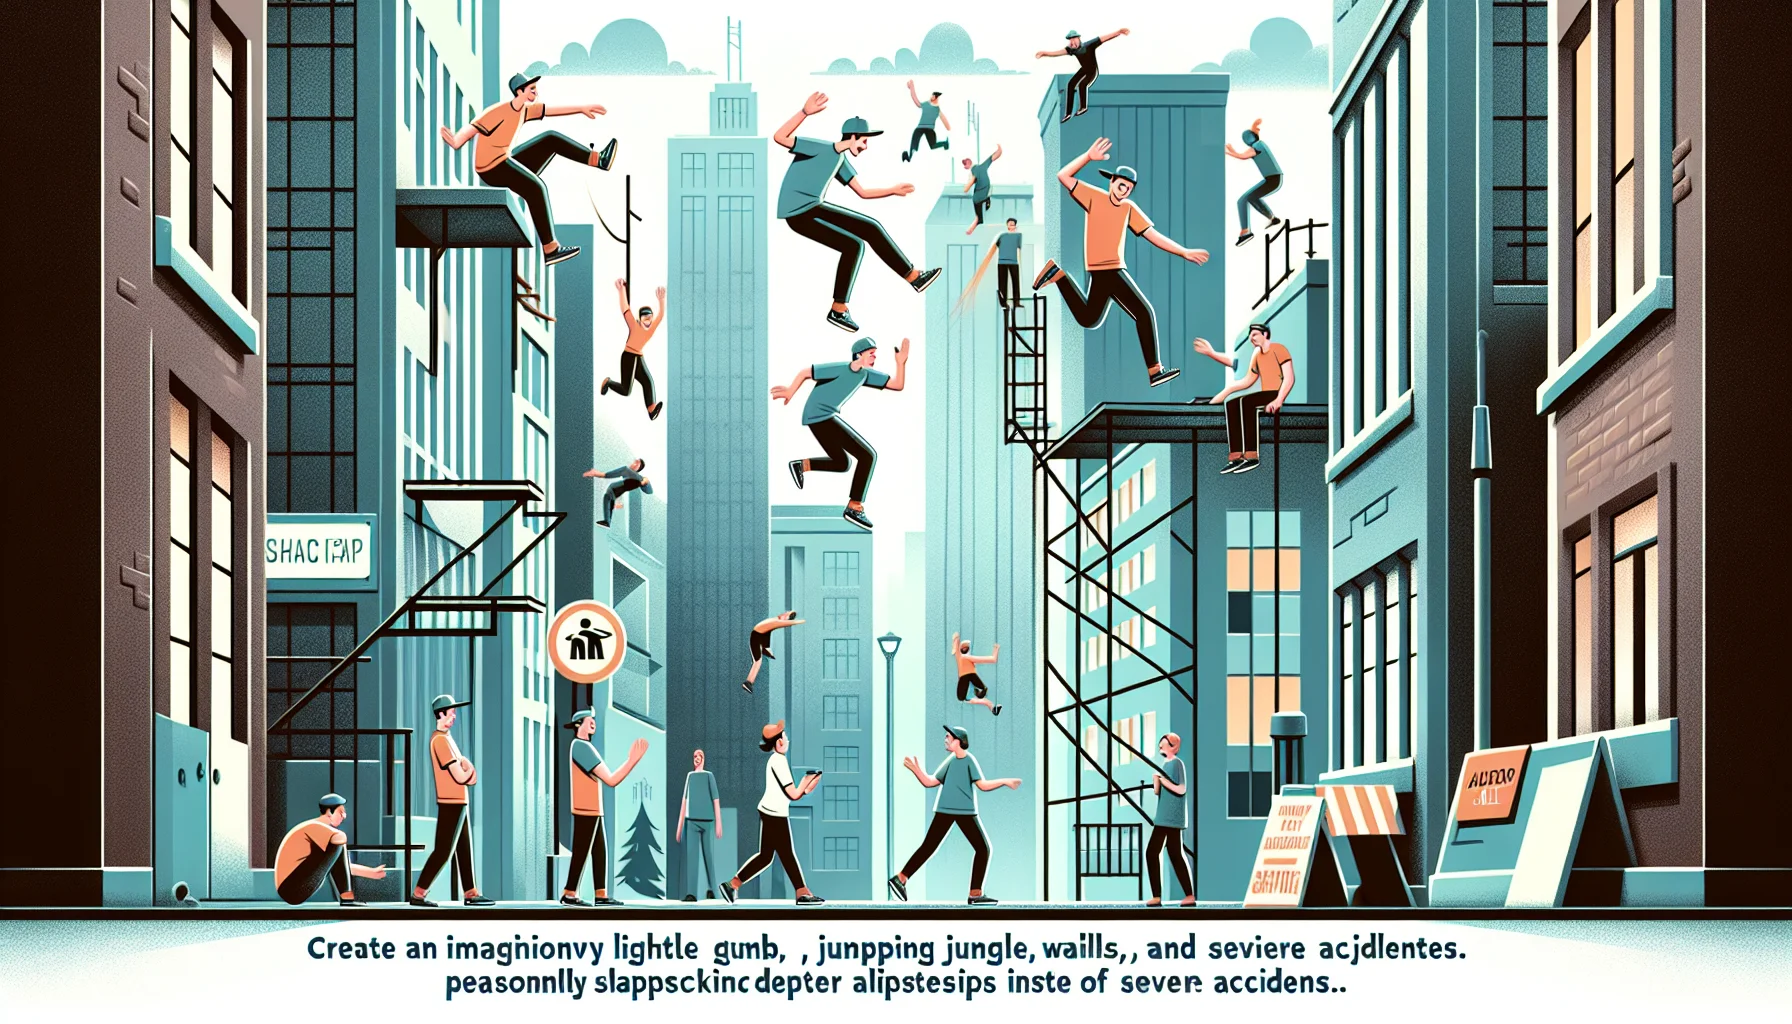 Create an imaginative and light-hearted image showing parkour enthusiasts in an urban jungle gym, jumping and gliding effortlessly across building rooftops, walls, railings, and other city elements. Each protagonist experiences harmless slapstick falls and funny missteps instead of severe accidents, pleasantly reminding viewers to stay safe during exercise.